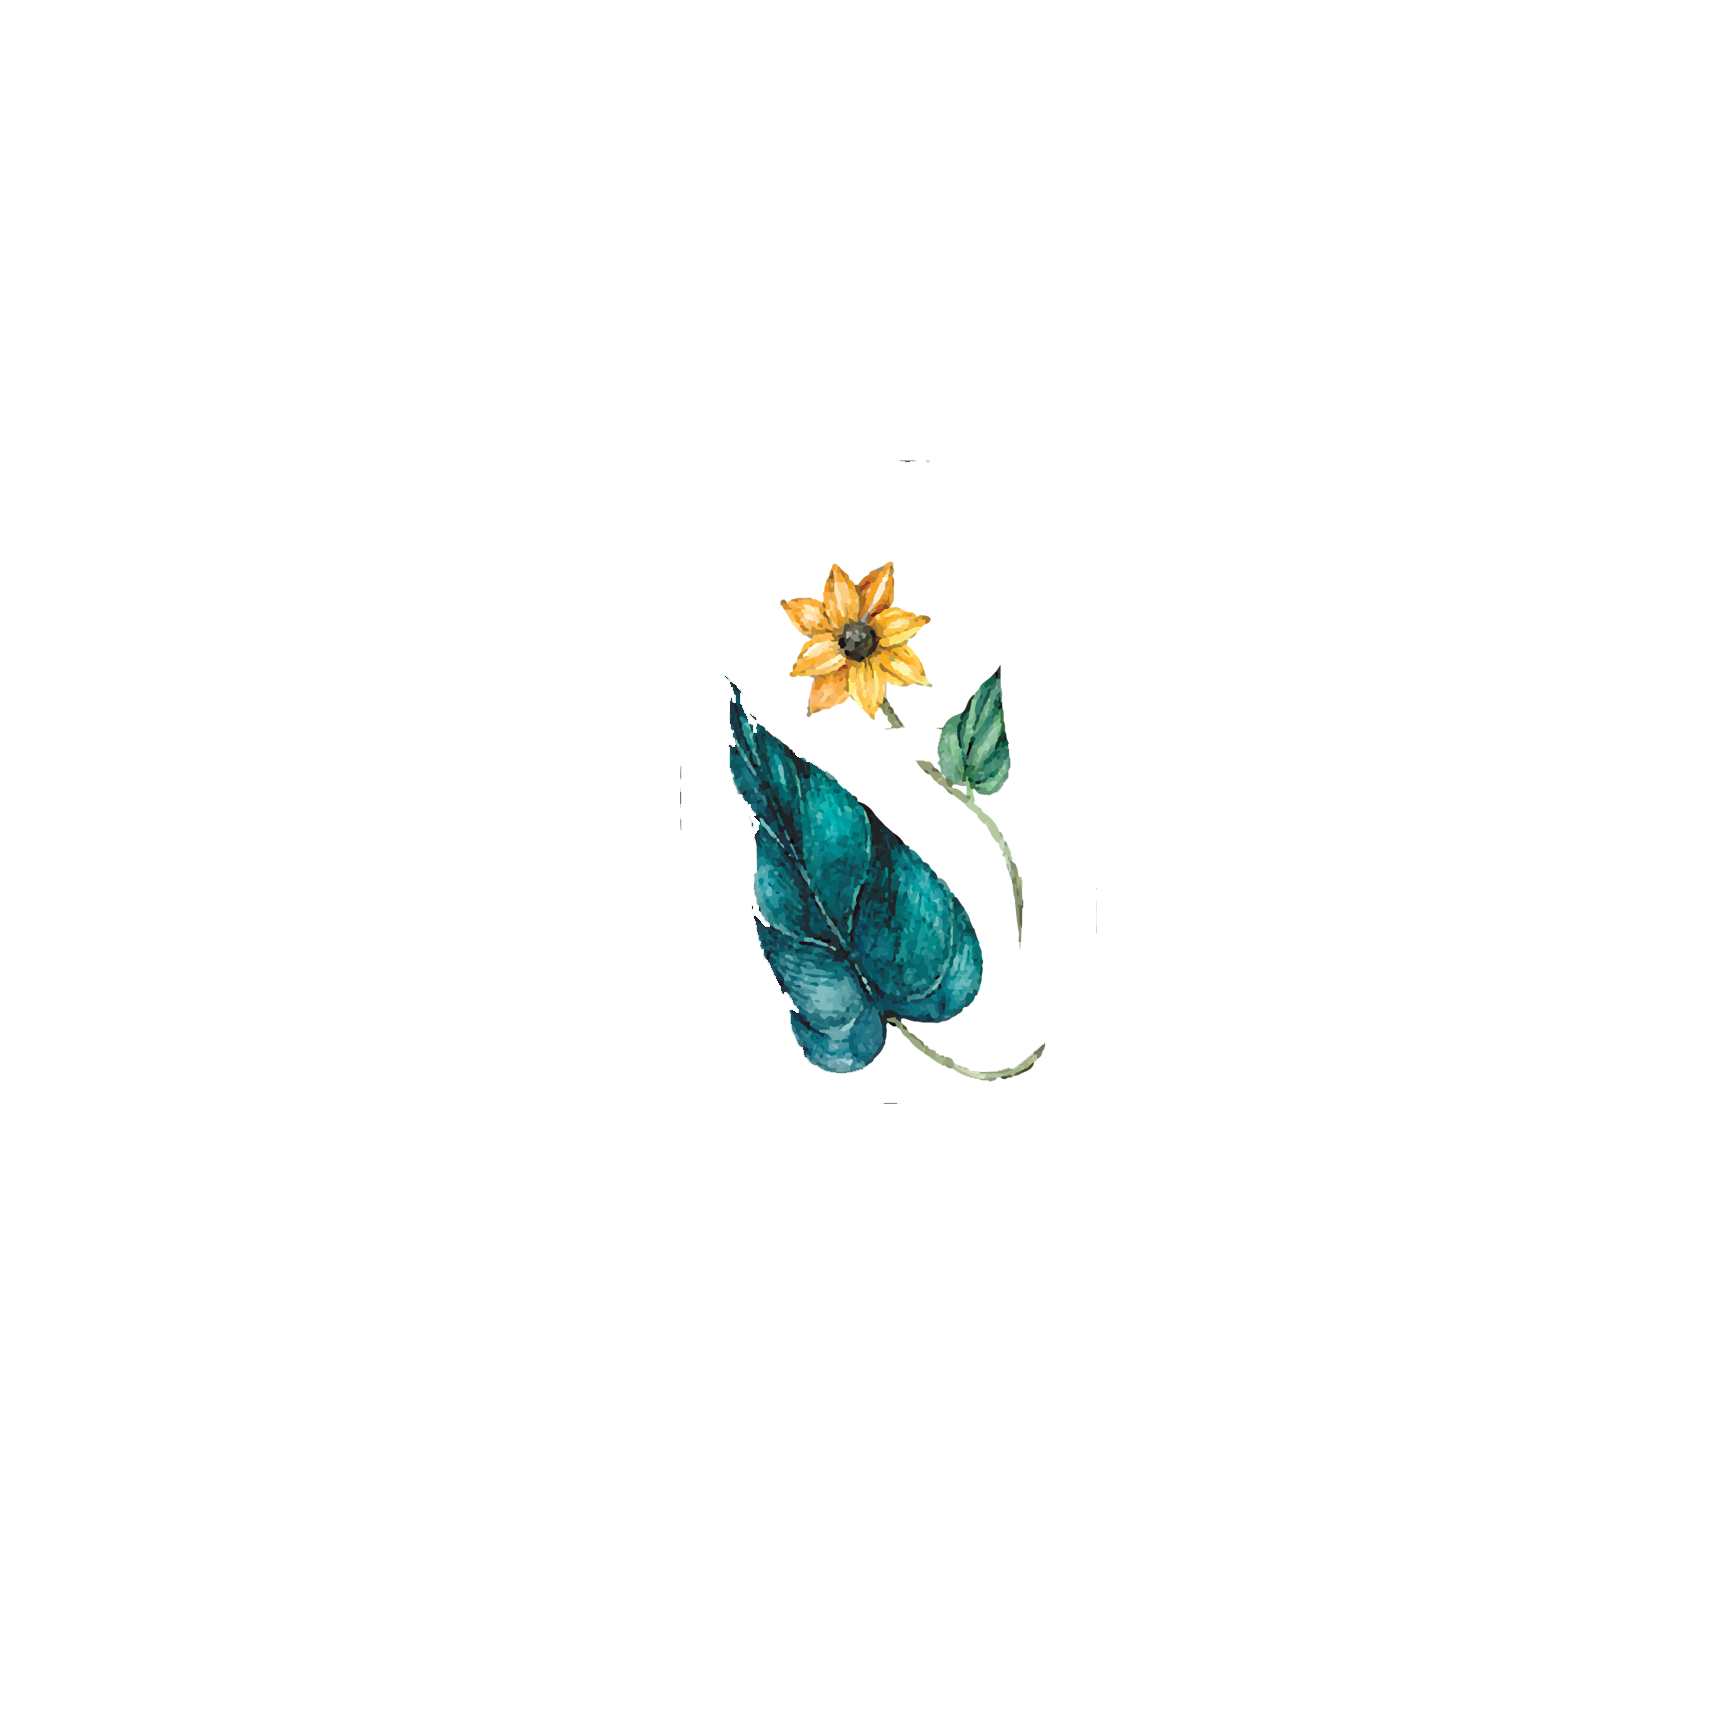 Click to read Day 6 - Nature